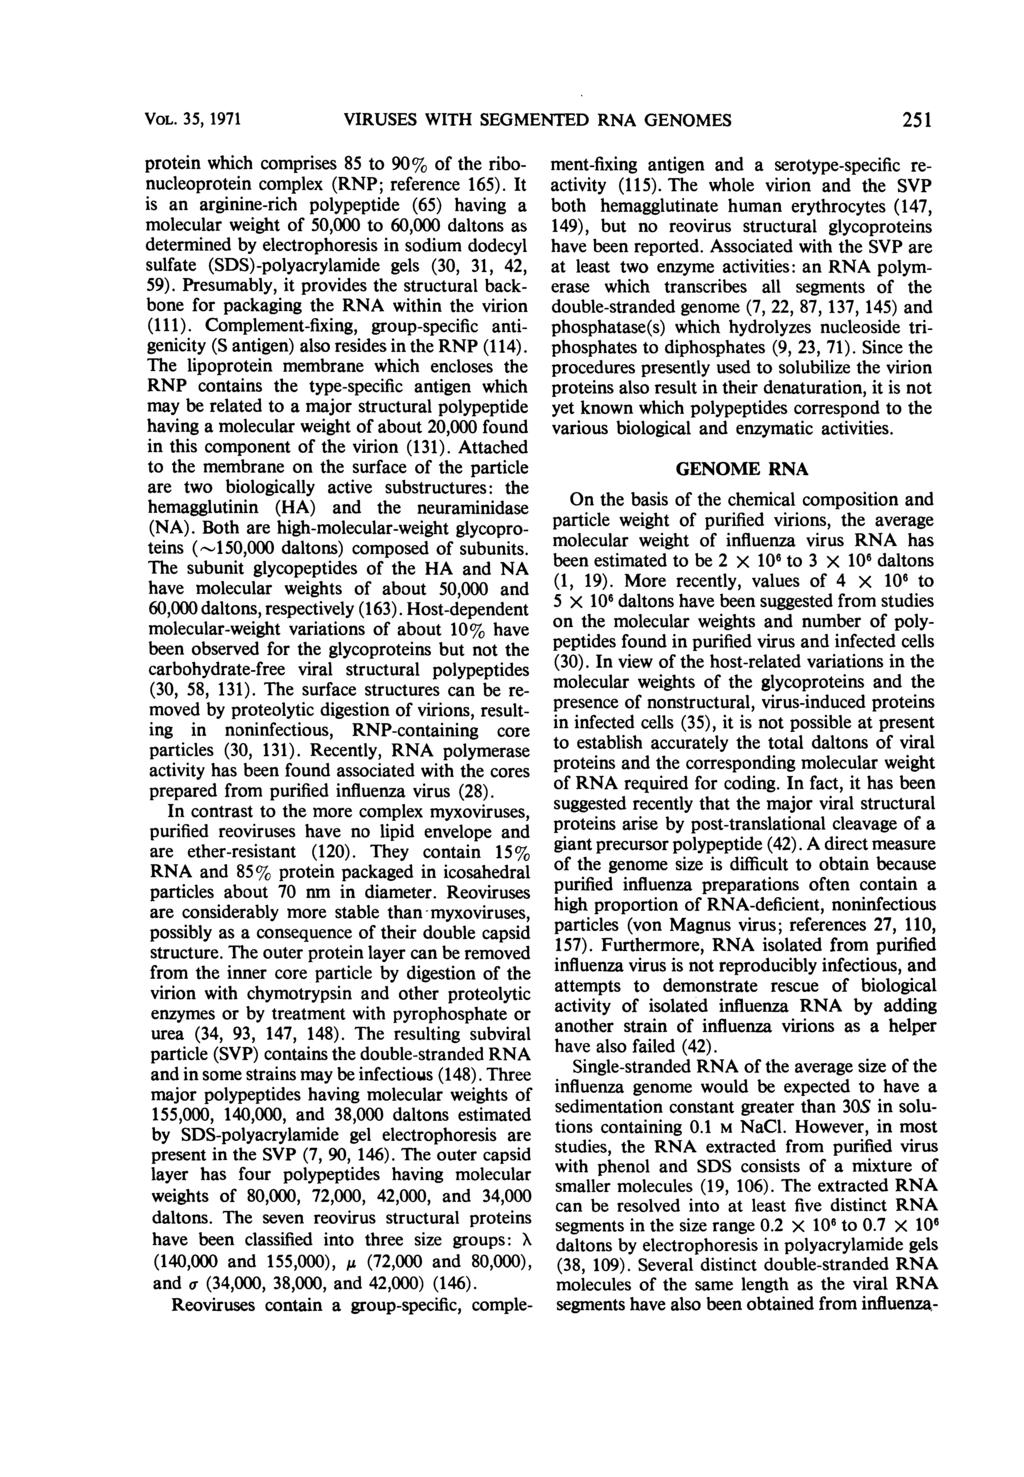 VOL. 35, 1971 VIRUSES WITH SEGMENTED RNA GENOMES 251 protein which comprises 85 to 90% of the ribonucleoprotein complex (RNP; reference 165).